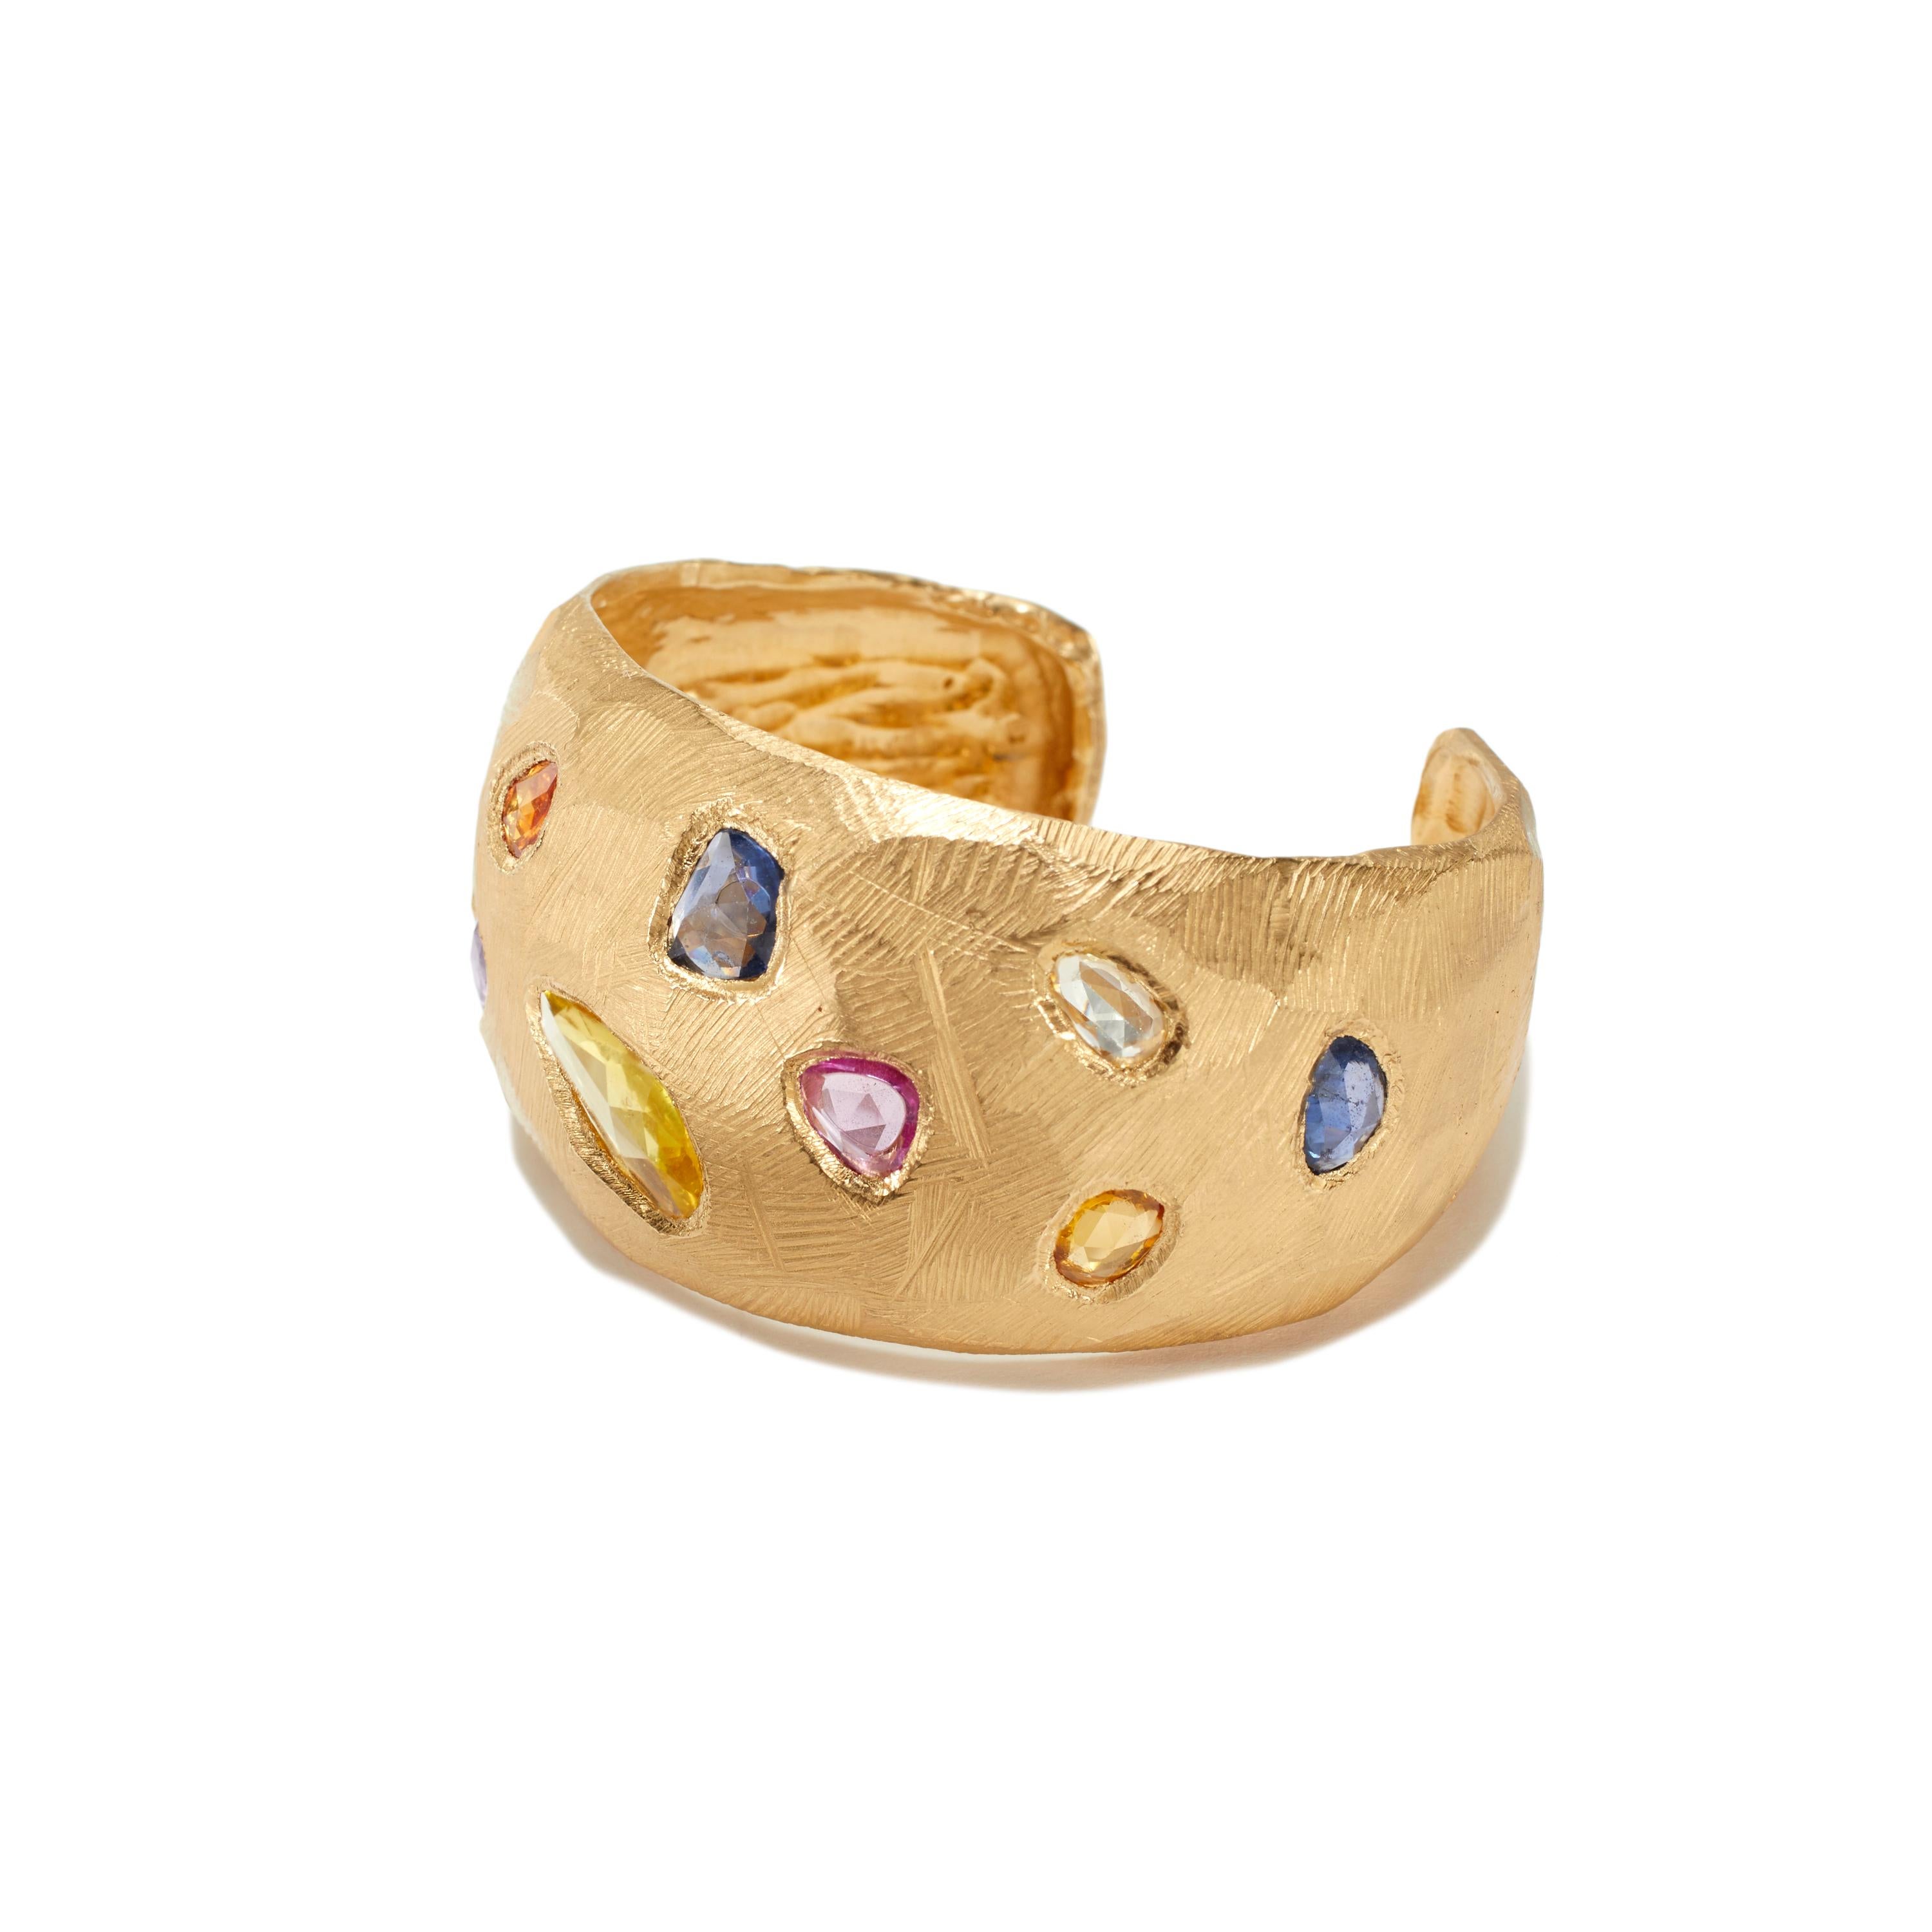 One of a kind handmade 18KT Gold Cuff Bracelet handcarved in New York by artist Page Sargisson.  13.05 carats worth of yellow, blue and pink sapphires in this piece.

This cuff bracelet is on the smaller side and fits a 6.5-7.5